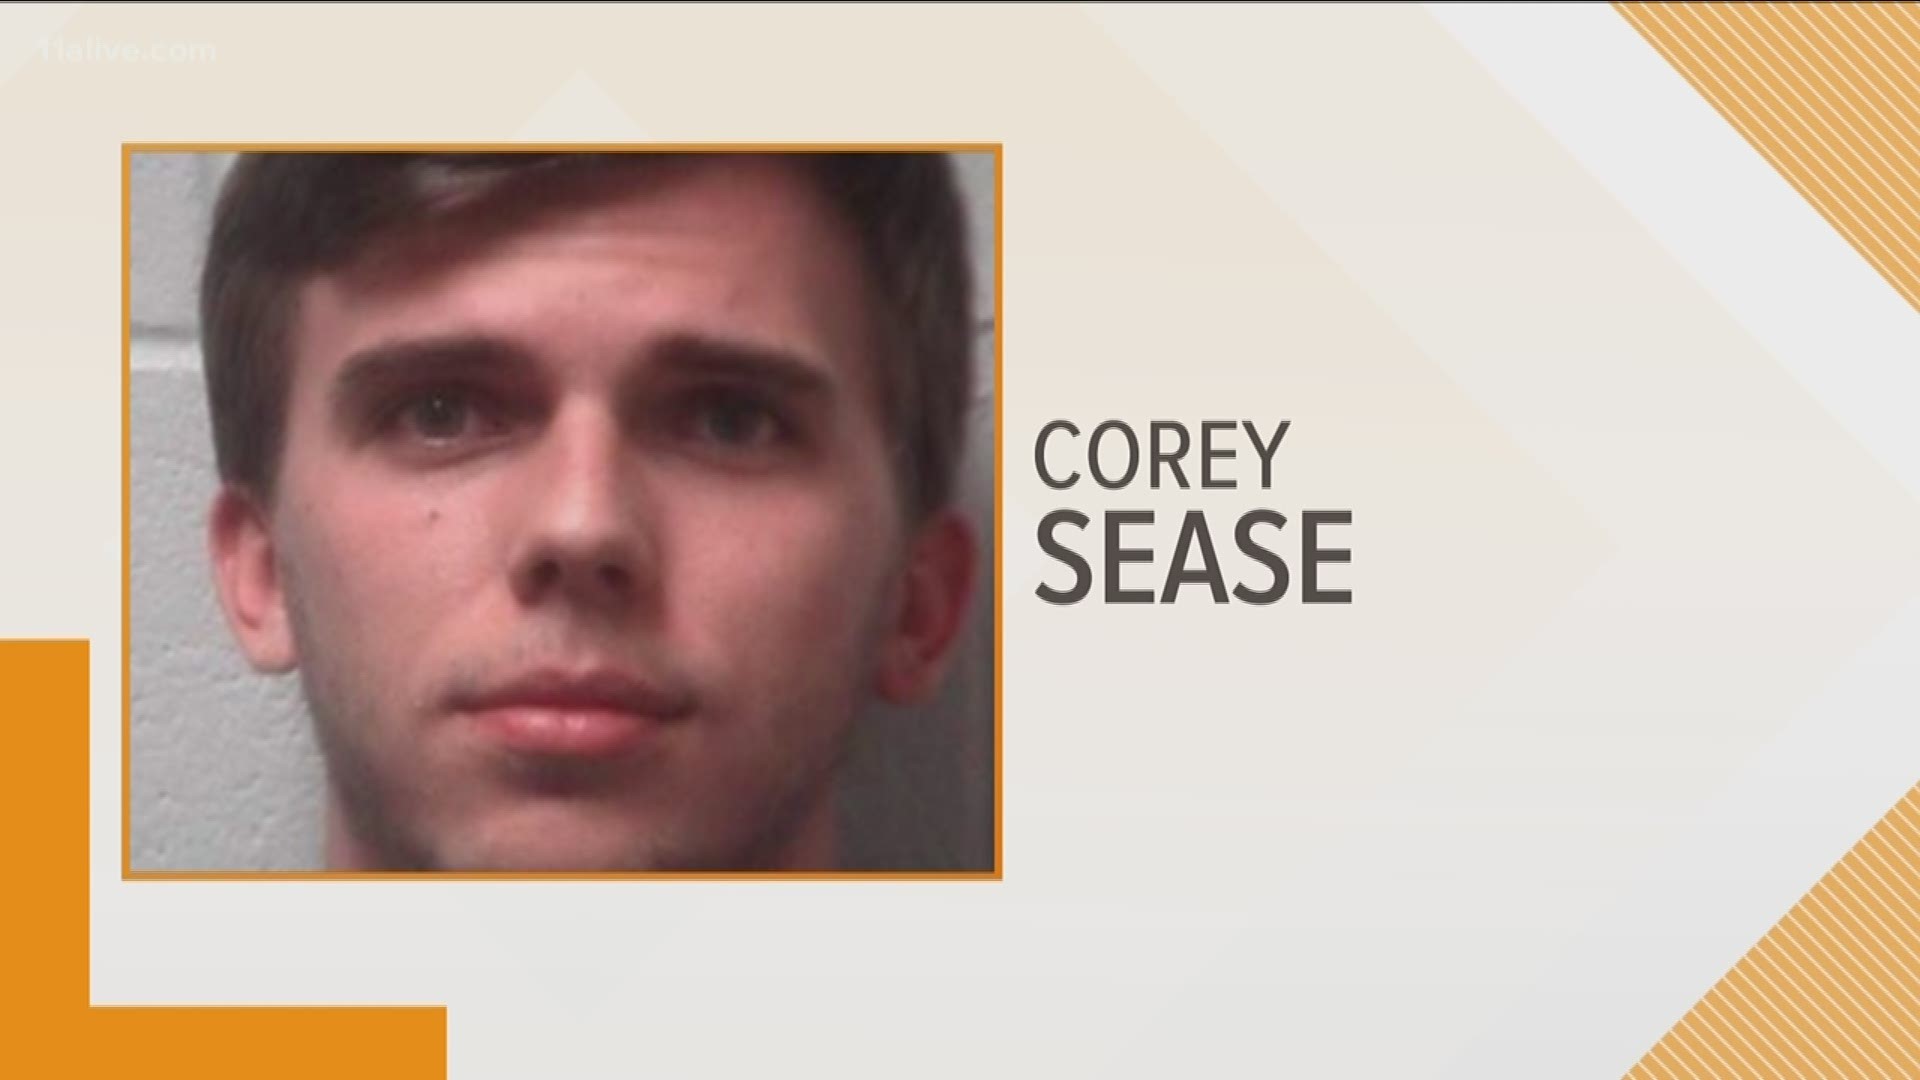 Corey Sease is expected to be sentenced this week.